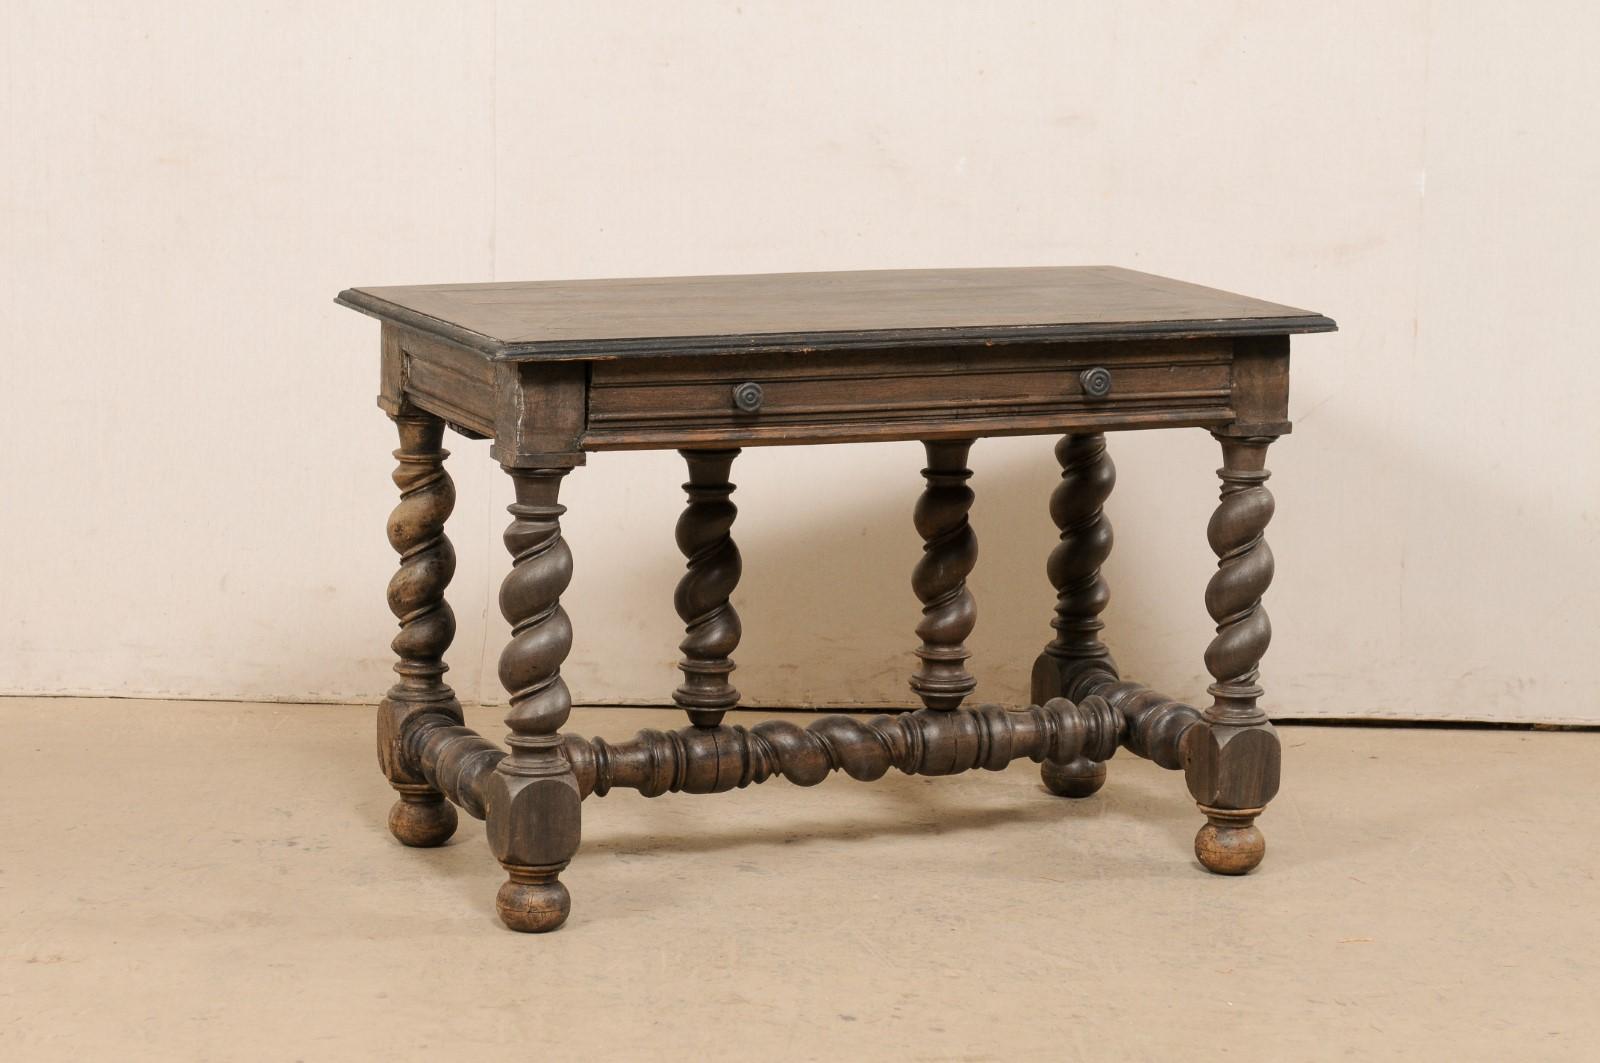 An Italian carved-wood table with single drawer from the turn of the 18th and 19th century. This antique table from Italy has a rectangular-shaped top which overhangs a apron below which houses a drawer along one long side, and is nicely presented